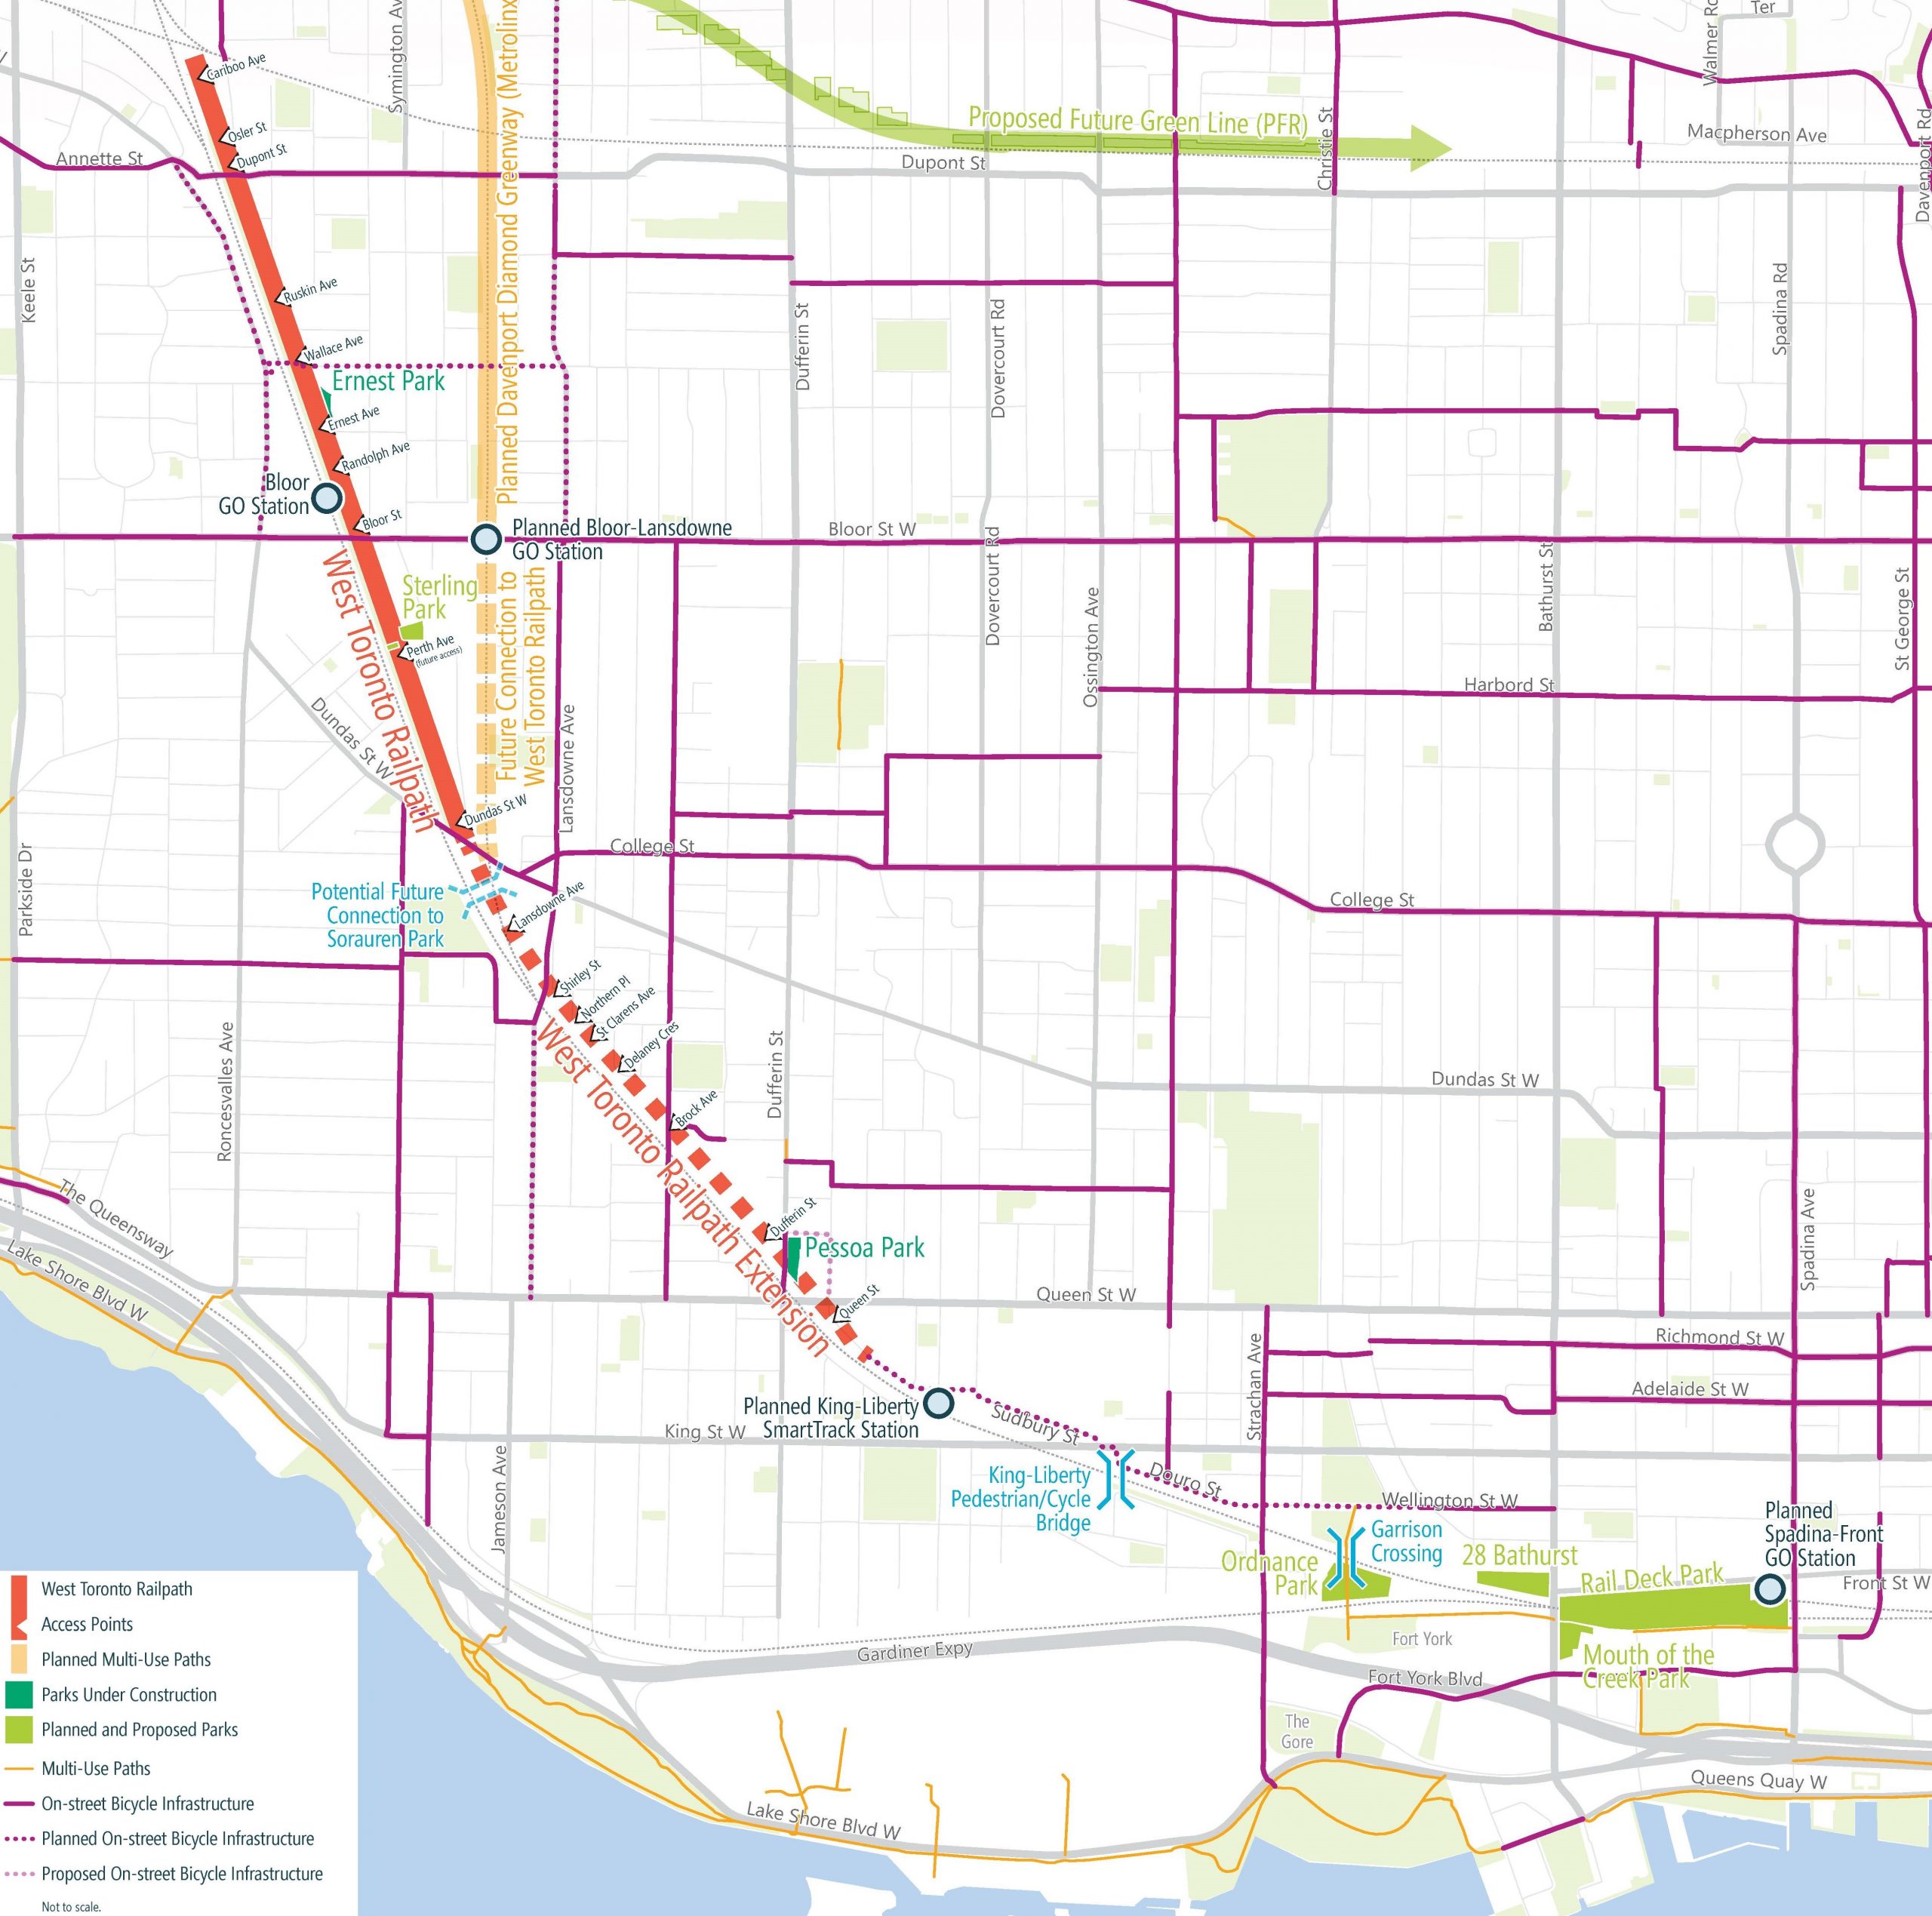 Map of the West Toronto Railpath Extension project area. Please contact the Project Team at cycling@toronto.ca or 416-202-6911 for more information.